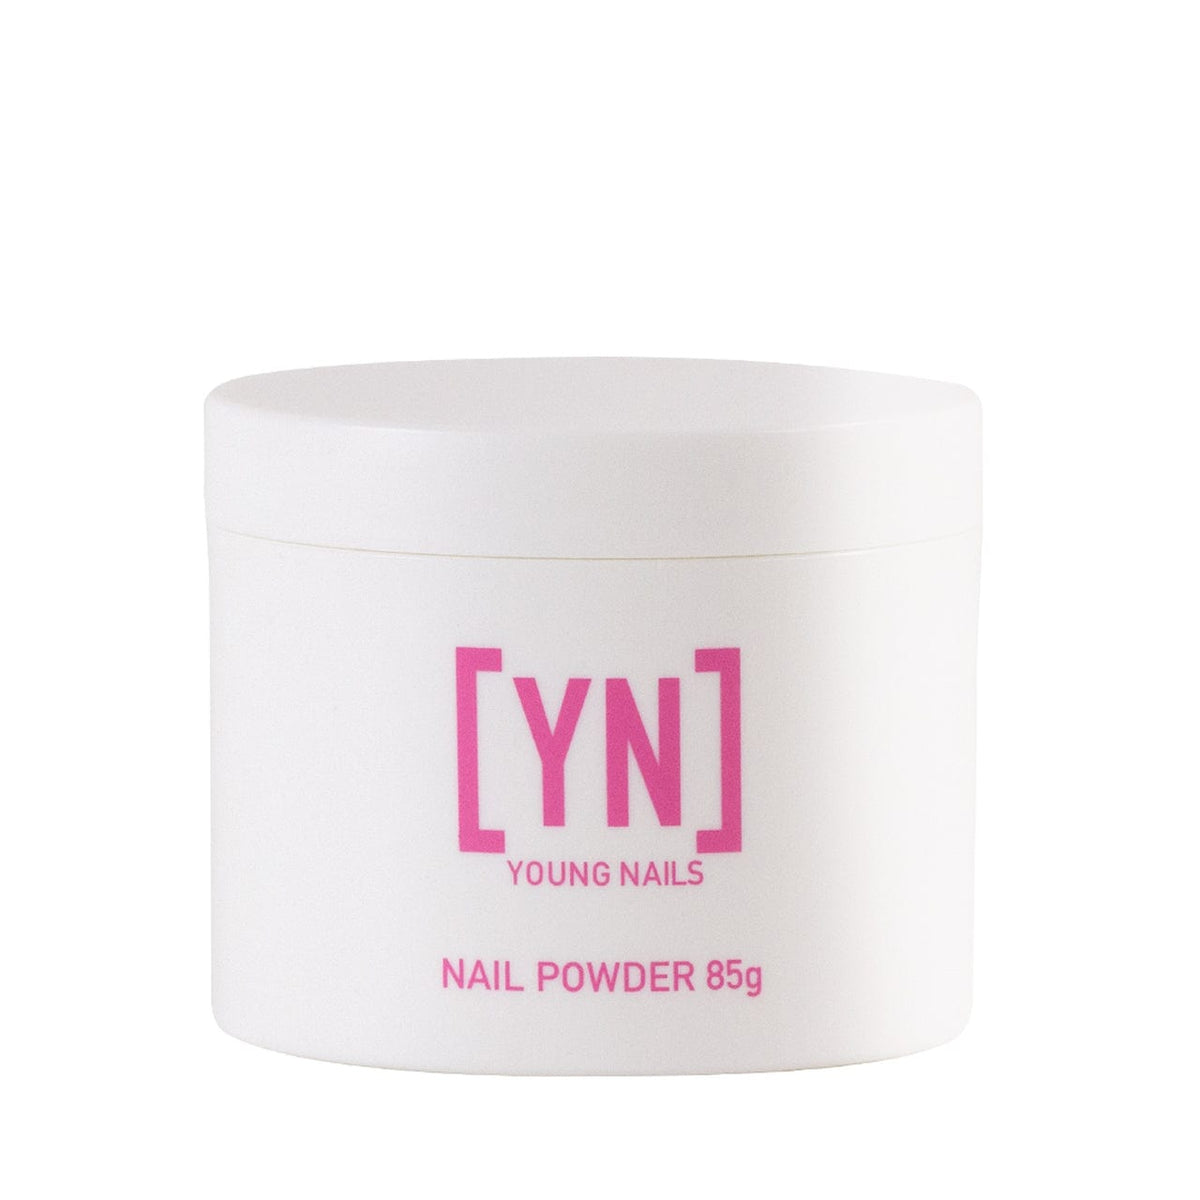 85g Core Natural Powder Nails - Young Nails - Luxe Pacifique